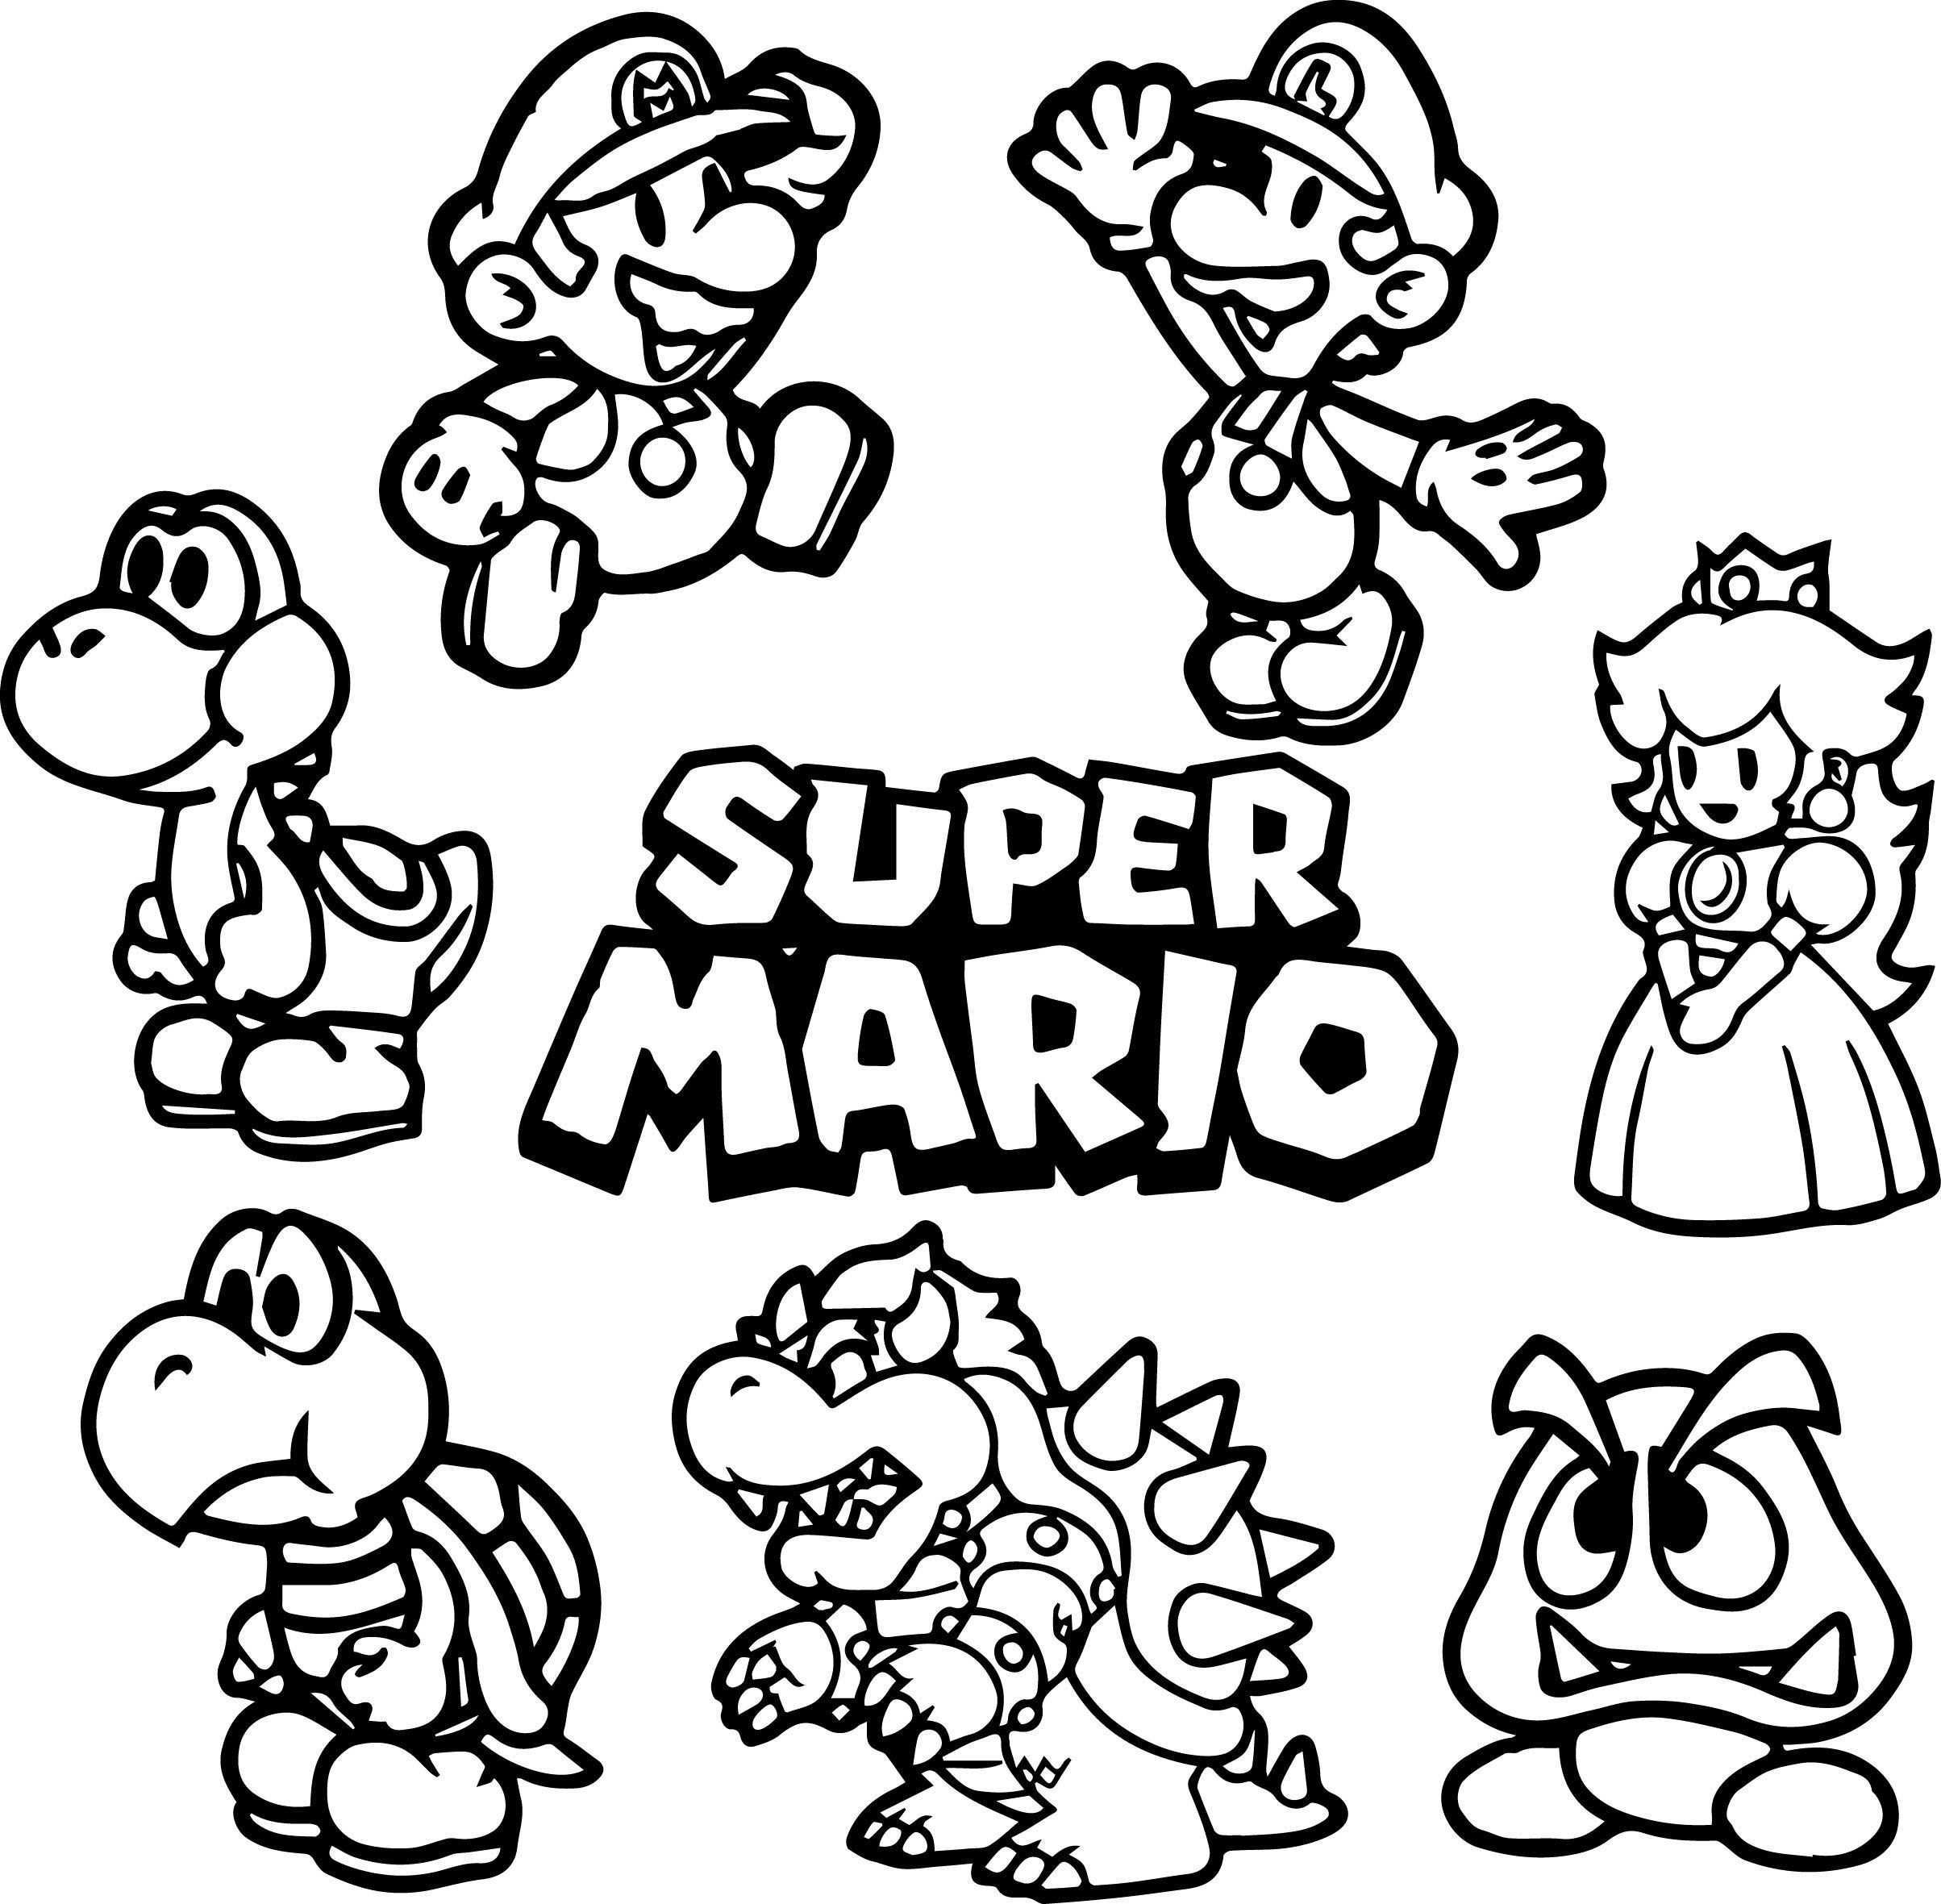 Super Mario Coloring Pages Lovely Mario Coloring Pages Super Mario Coloring Pages Mar